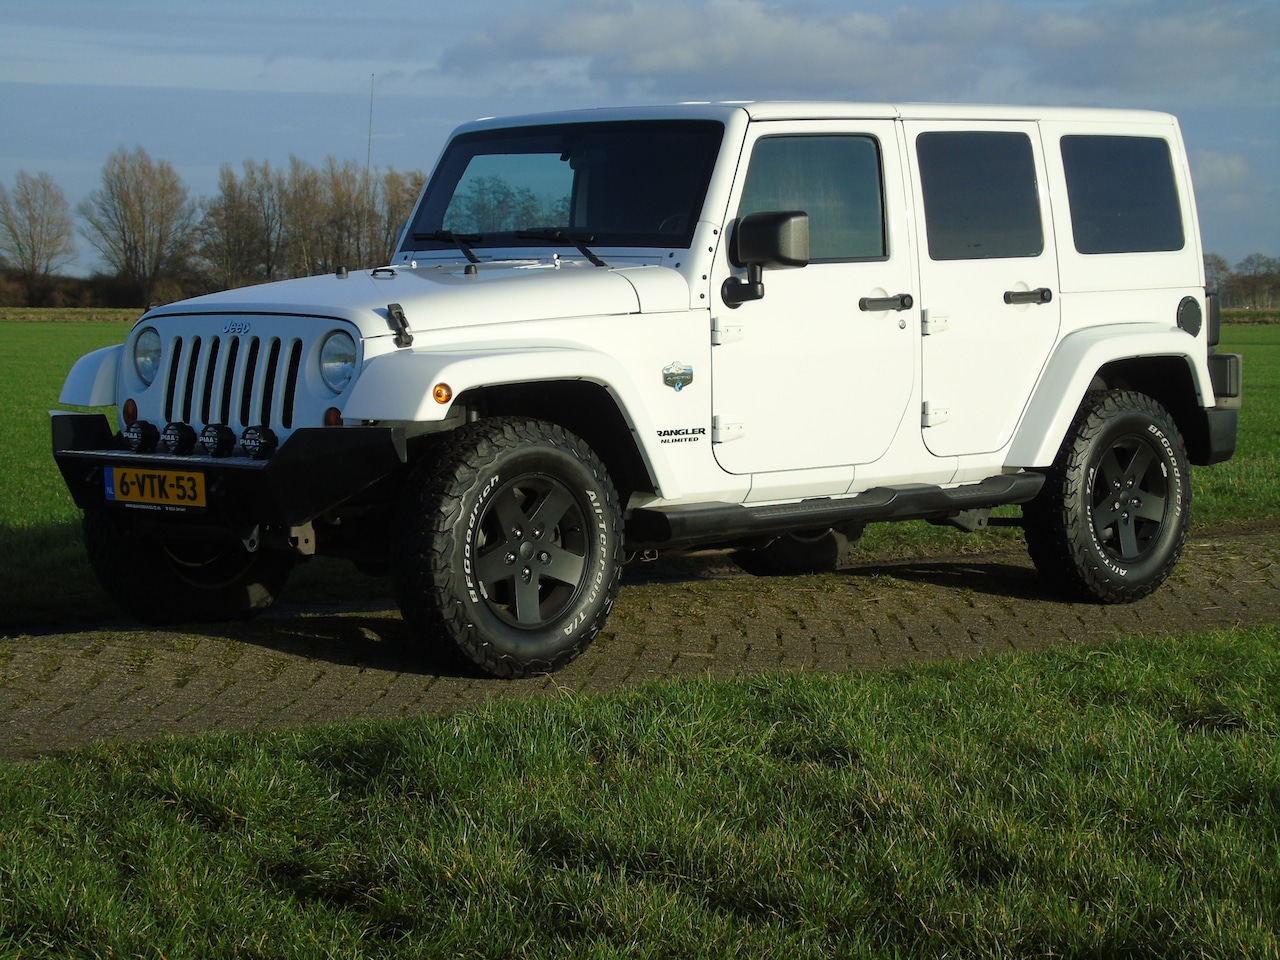 jeep wrangler arctic used – Search for your used car on the parking